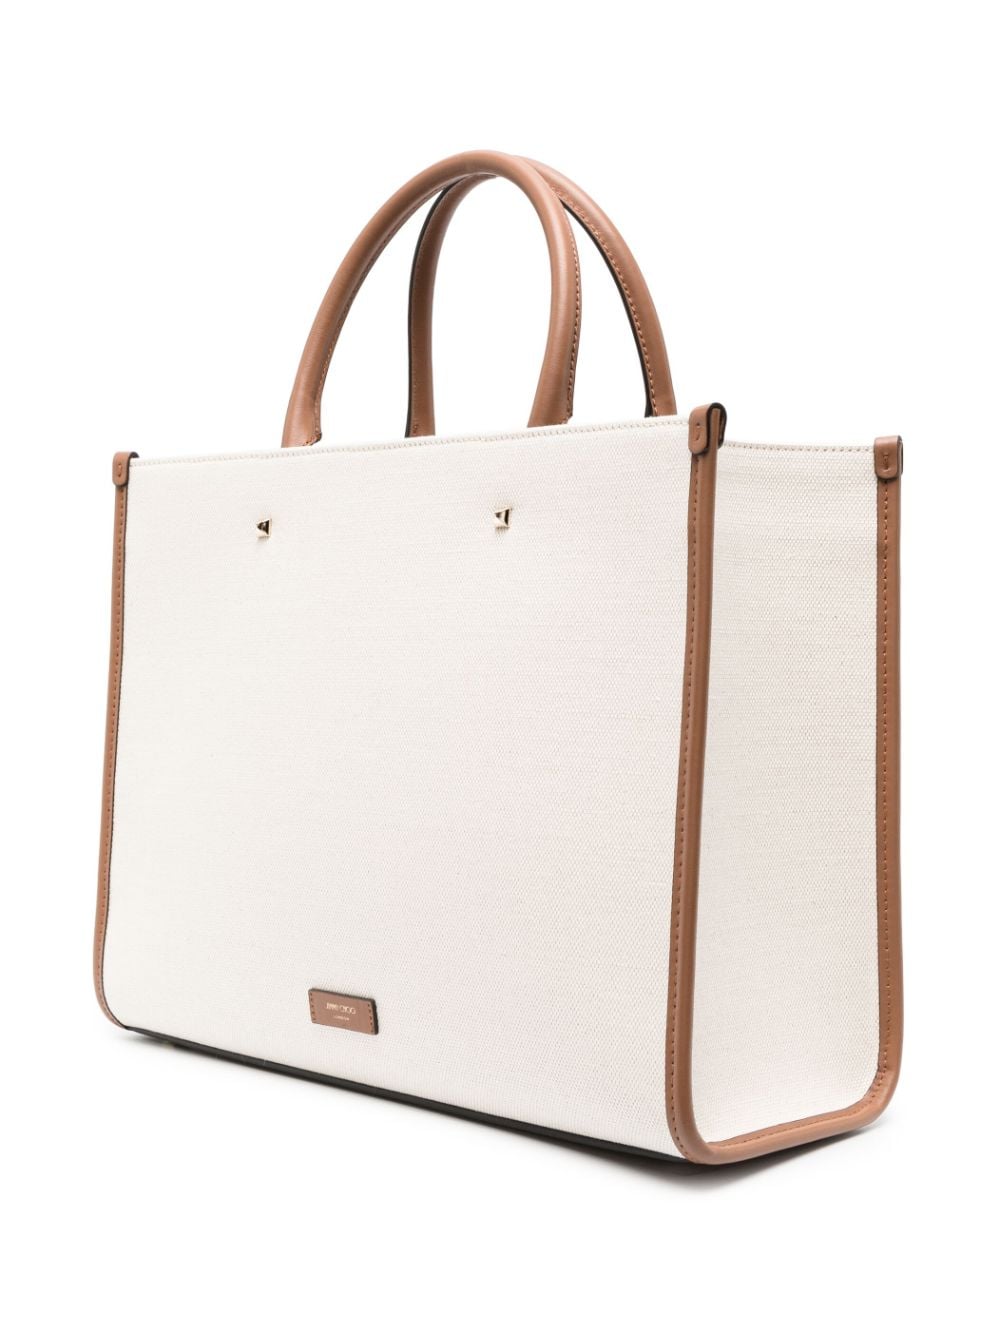 JIMMY CHOO Medium Beige Tote Handbag for Women, Featuring Recycled Materials and Leather, SS24 Collection